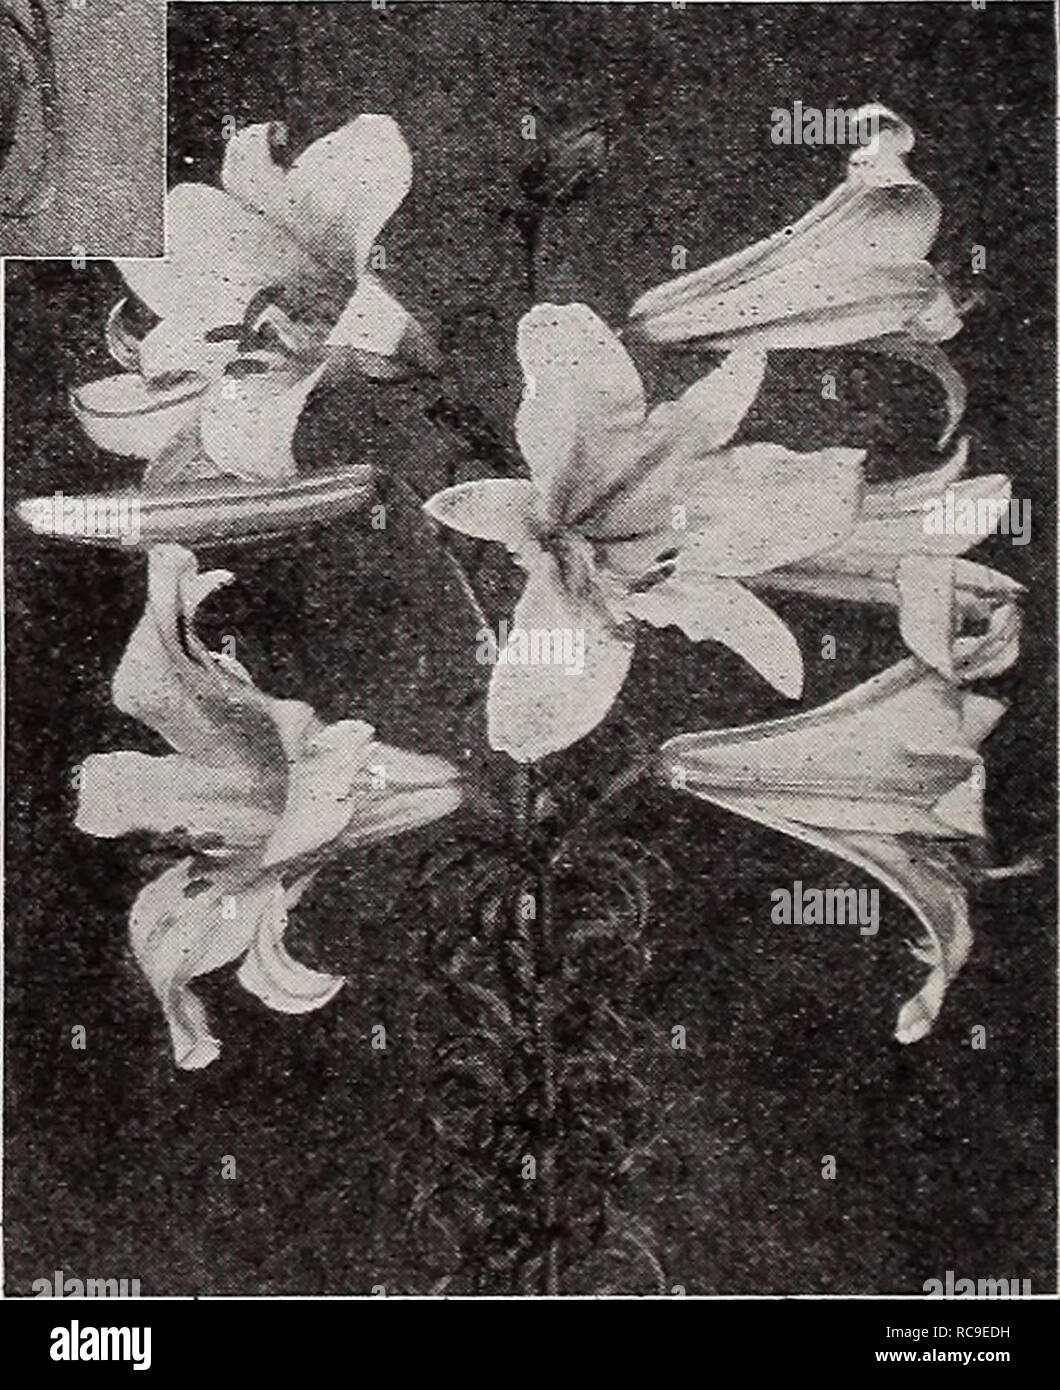 . Dreer's autumn catalogue. Flowers Seeds Catalogs; Bulbs (Plants) Seeds Catalogs; Nurseries (Horticulture) Catalogs; Gardening Equipment and supplies Catalogs. Lilium PniLippiNEXbL I uR.MubvM.M Philippinense Formosanum One of the most wonderful Lilies in existence. Flowers of purest white tinted rose outside, about the same size and form as the Easter Lily with same delightful fragrance. They are excellent both for pot culture and the garden, and invaluable for cutting. Under moderate climate will flower continuously year after year; perfectly hardy under severest climatic conditions if prote Stock Photo